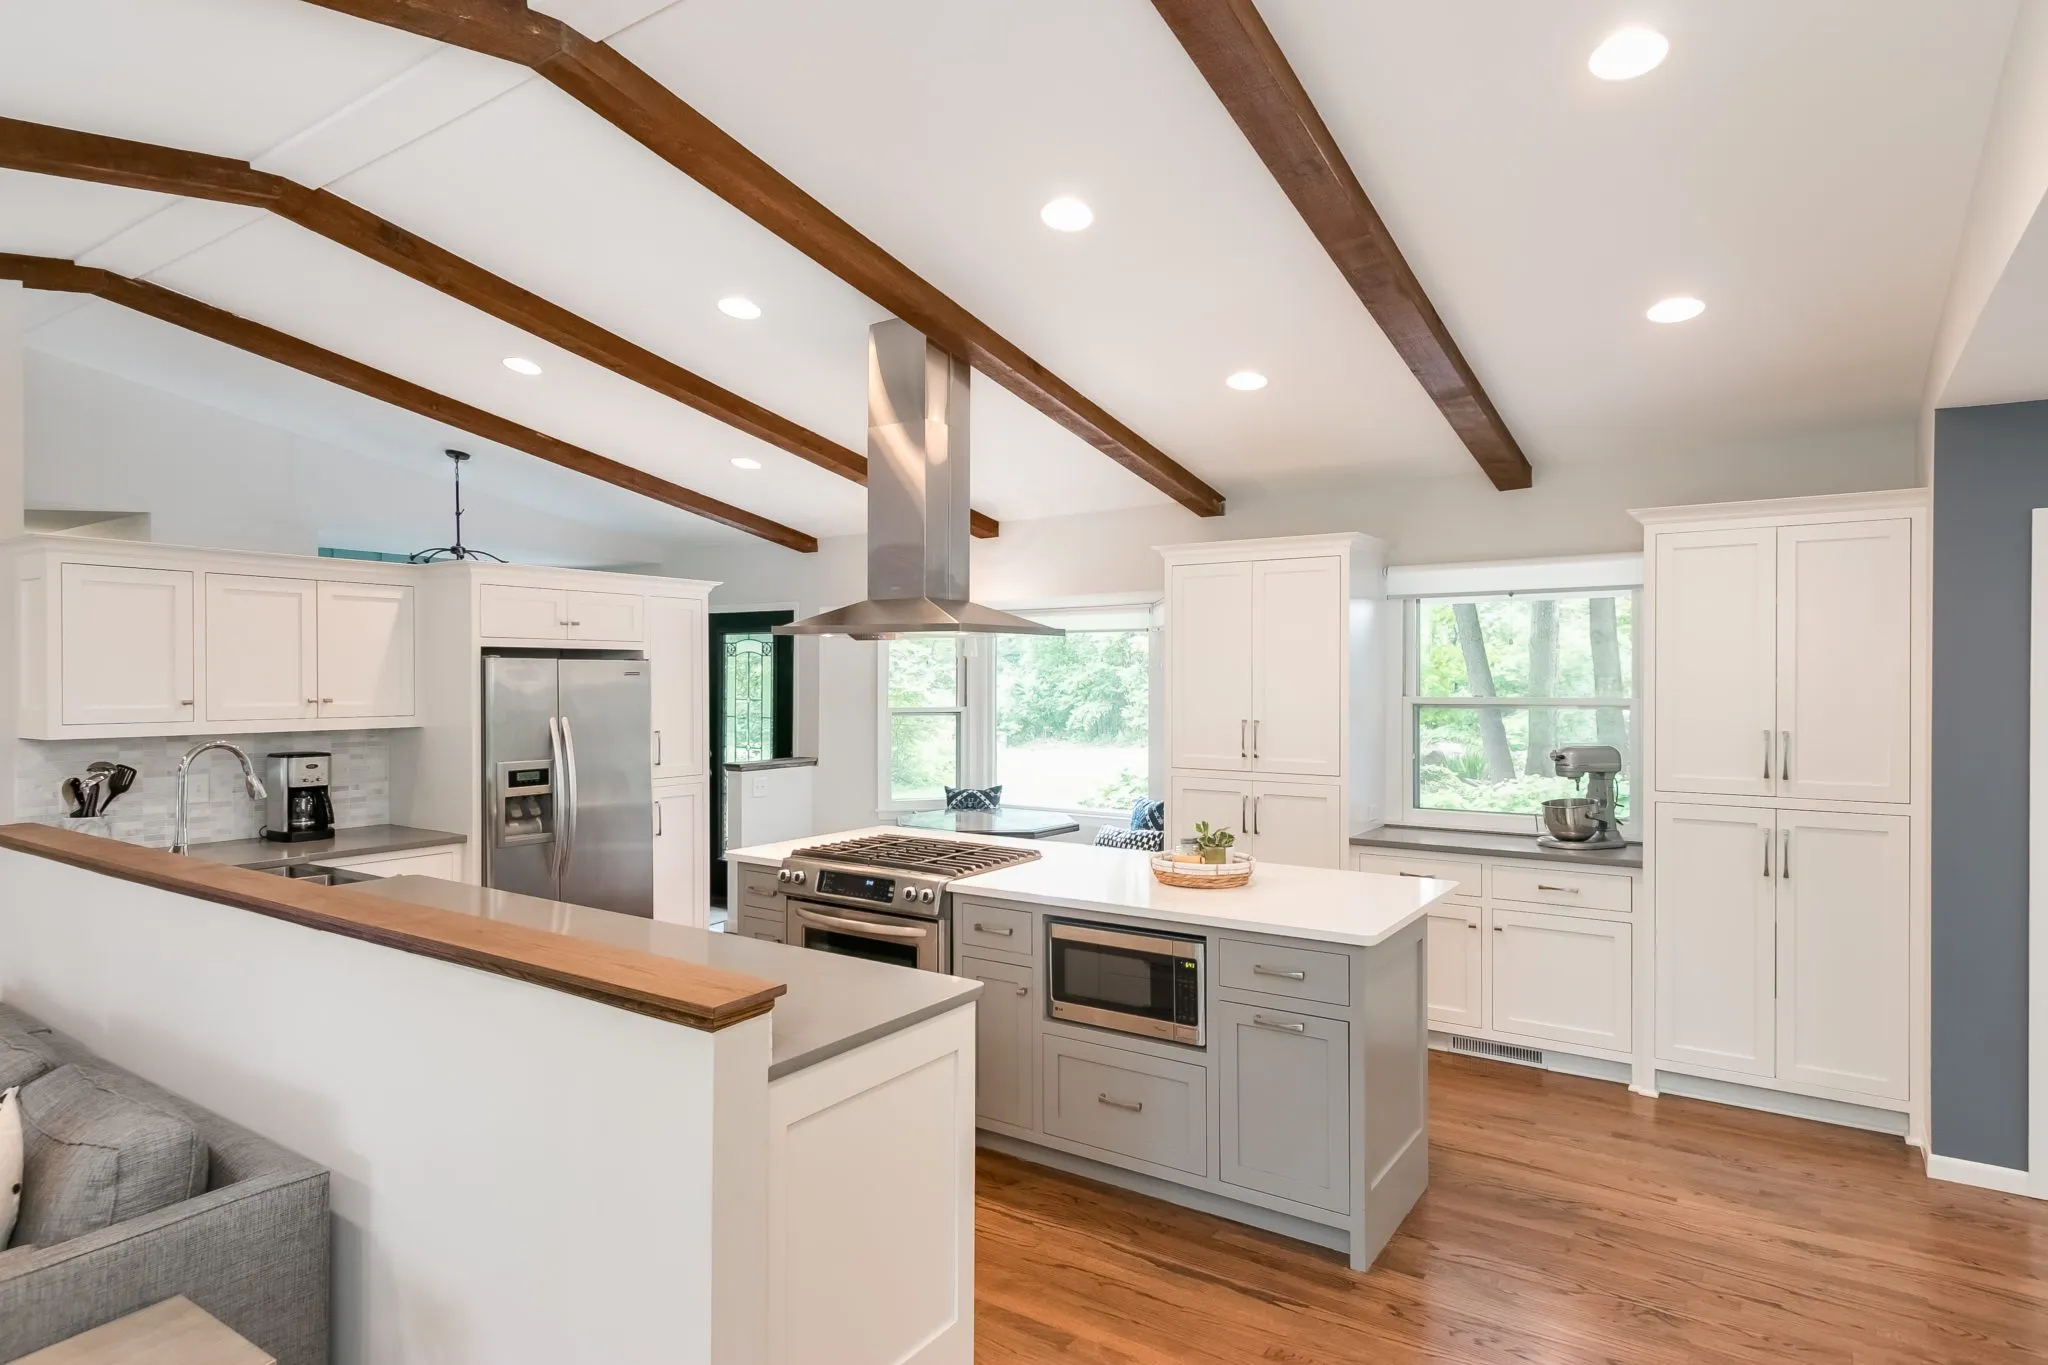 open concept kitchen | wood ceiling beams | island | fbc remodel